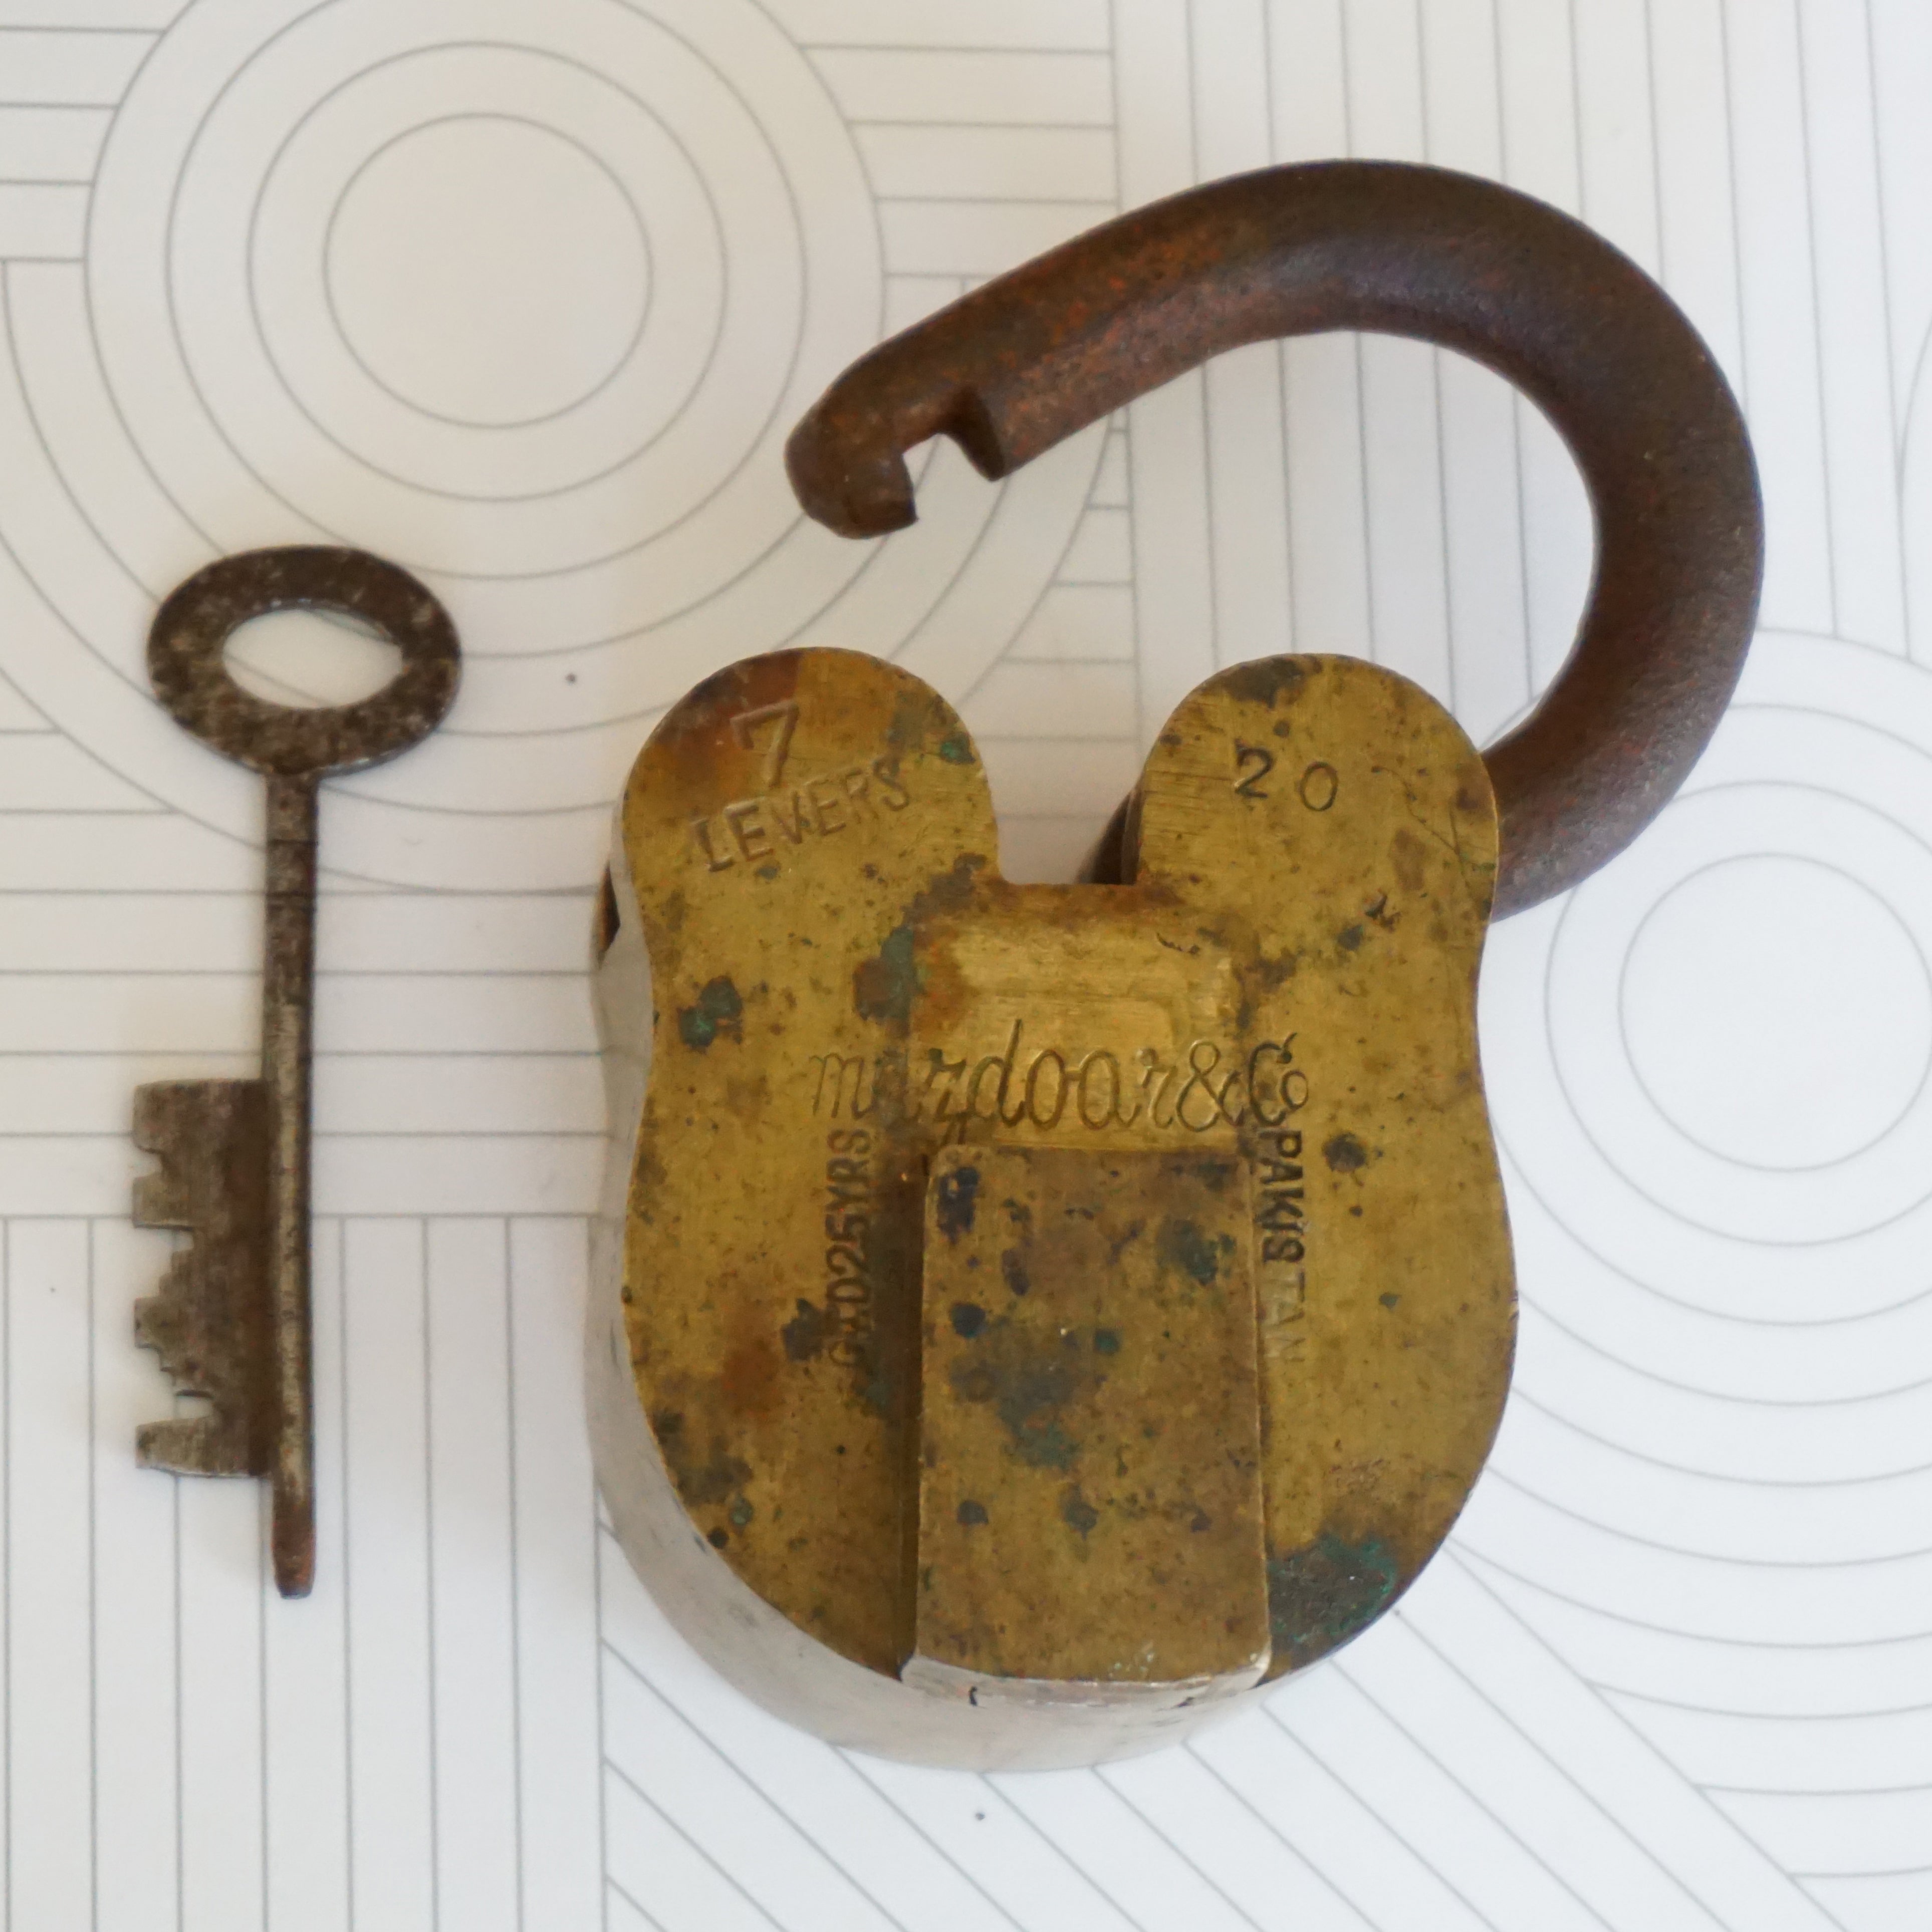 Antique Solid Brass MAZDOAR & CO Lock and Original Key. 7 Levels. G.I.D. 25 Years